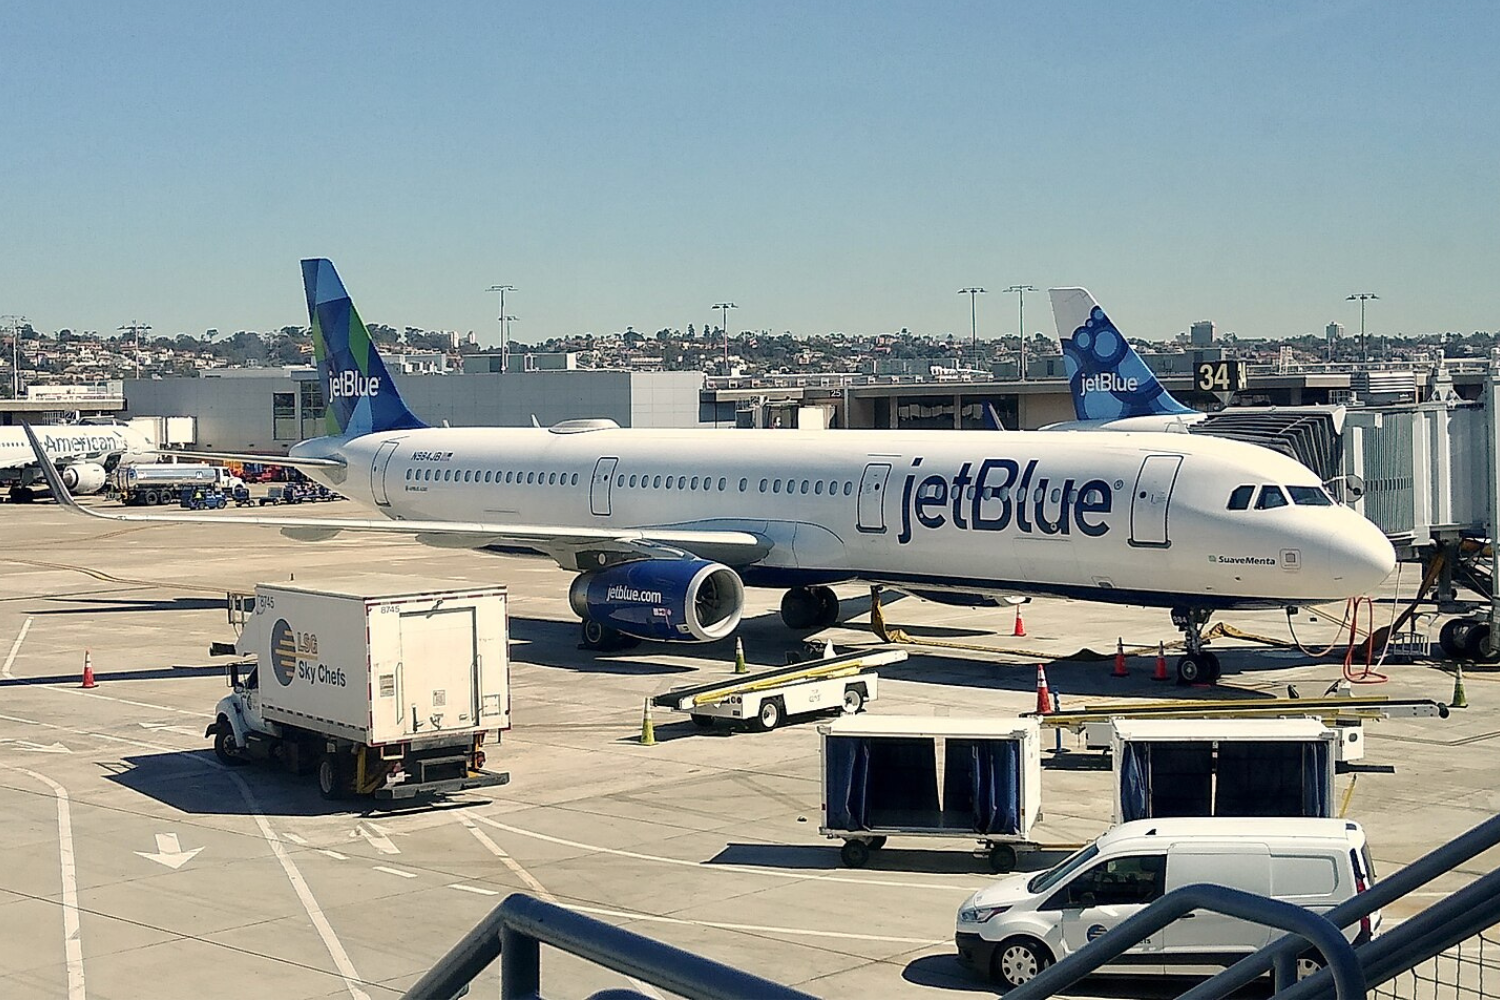 Jetblue airlines in the airport